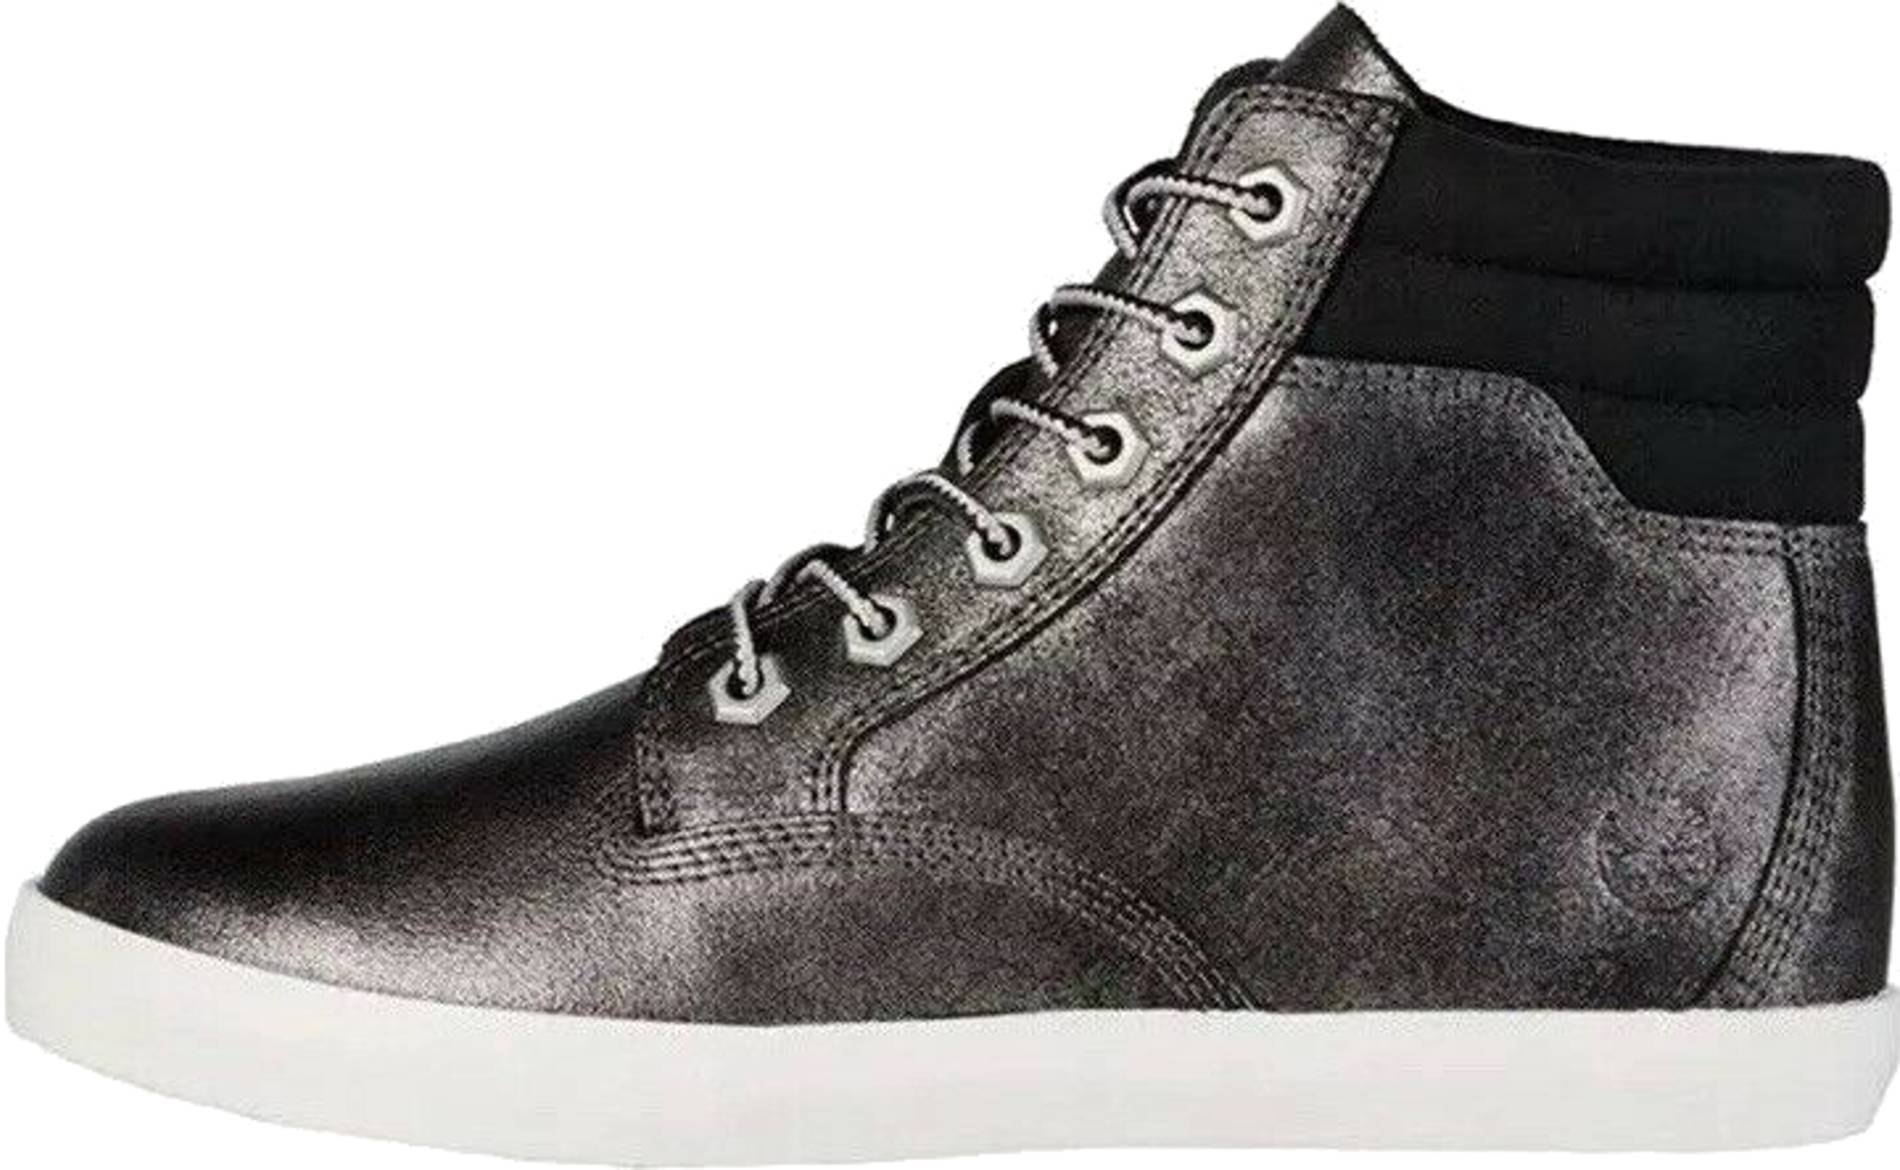 de elite Tussendoortje Perioperatieve periode Infrastructure-intelligenceShops, Timberland Dausette Review | Sandali  TIMBERLAND Amalfi Vibes TB0A2CET015 Black Leather, Facts, Comparison